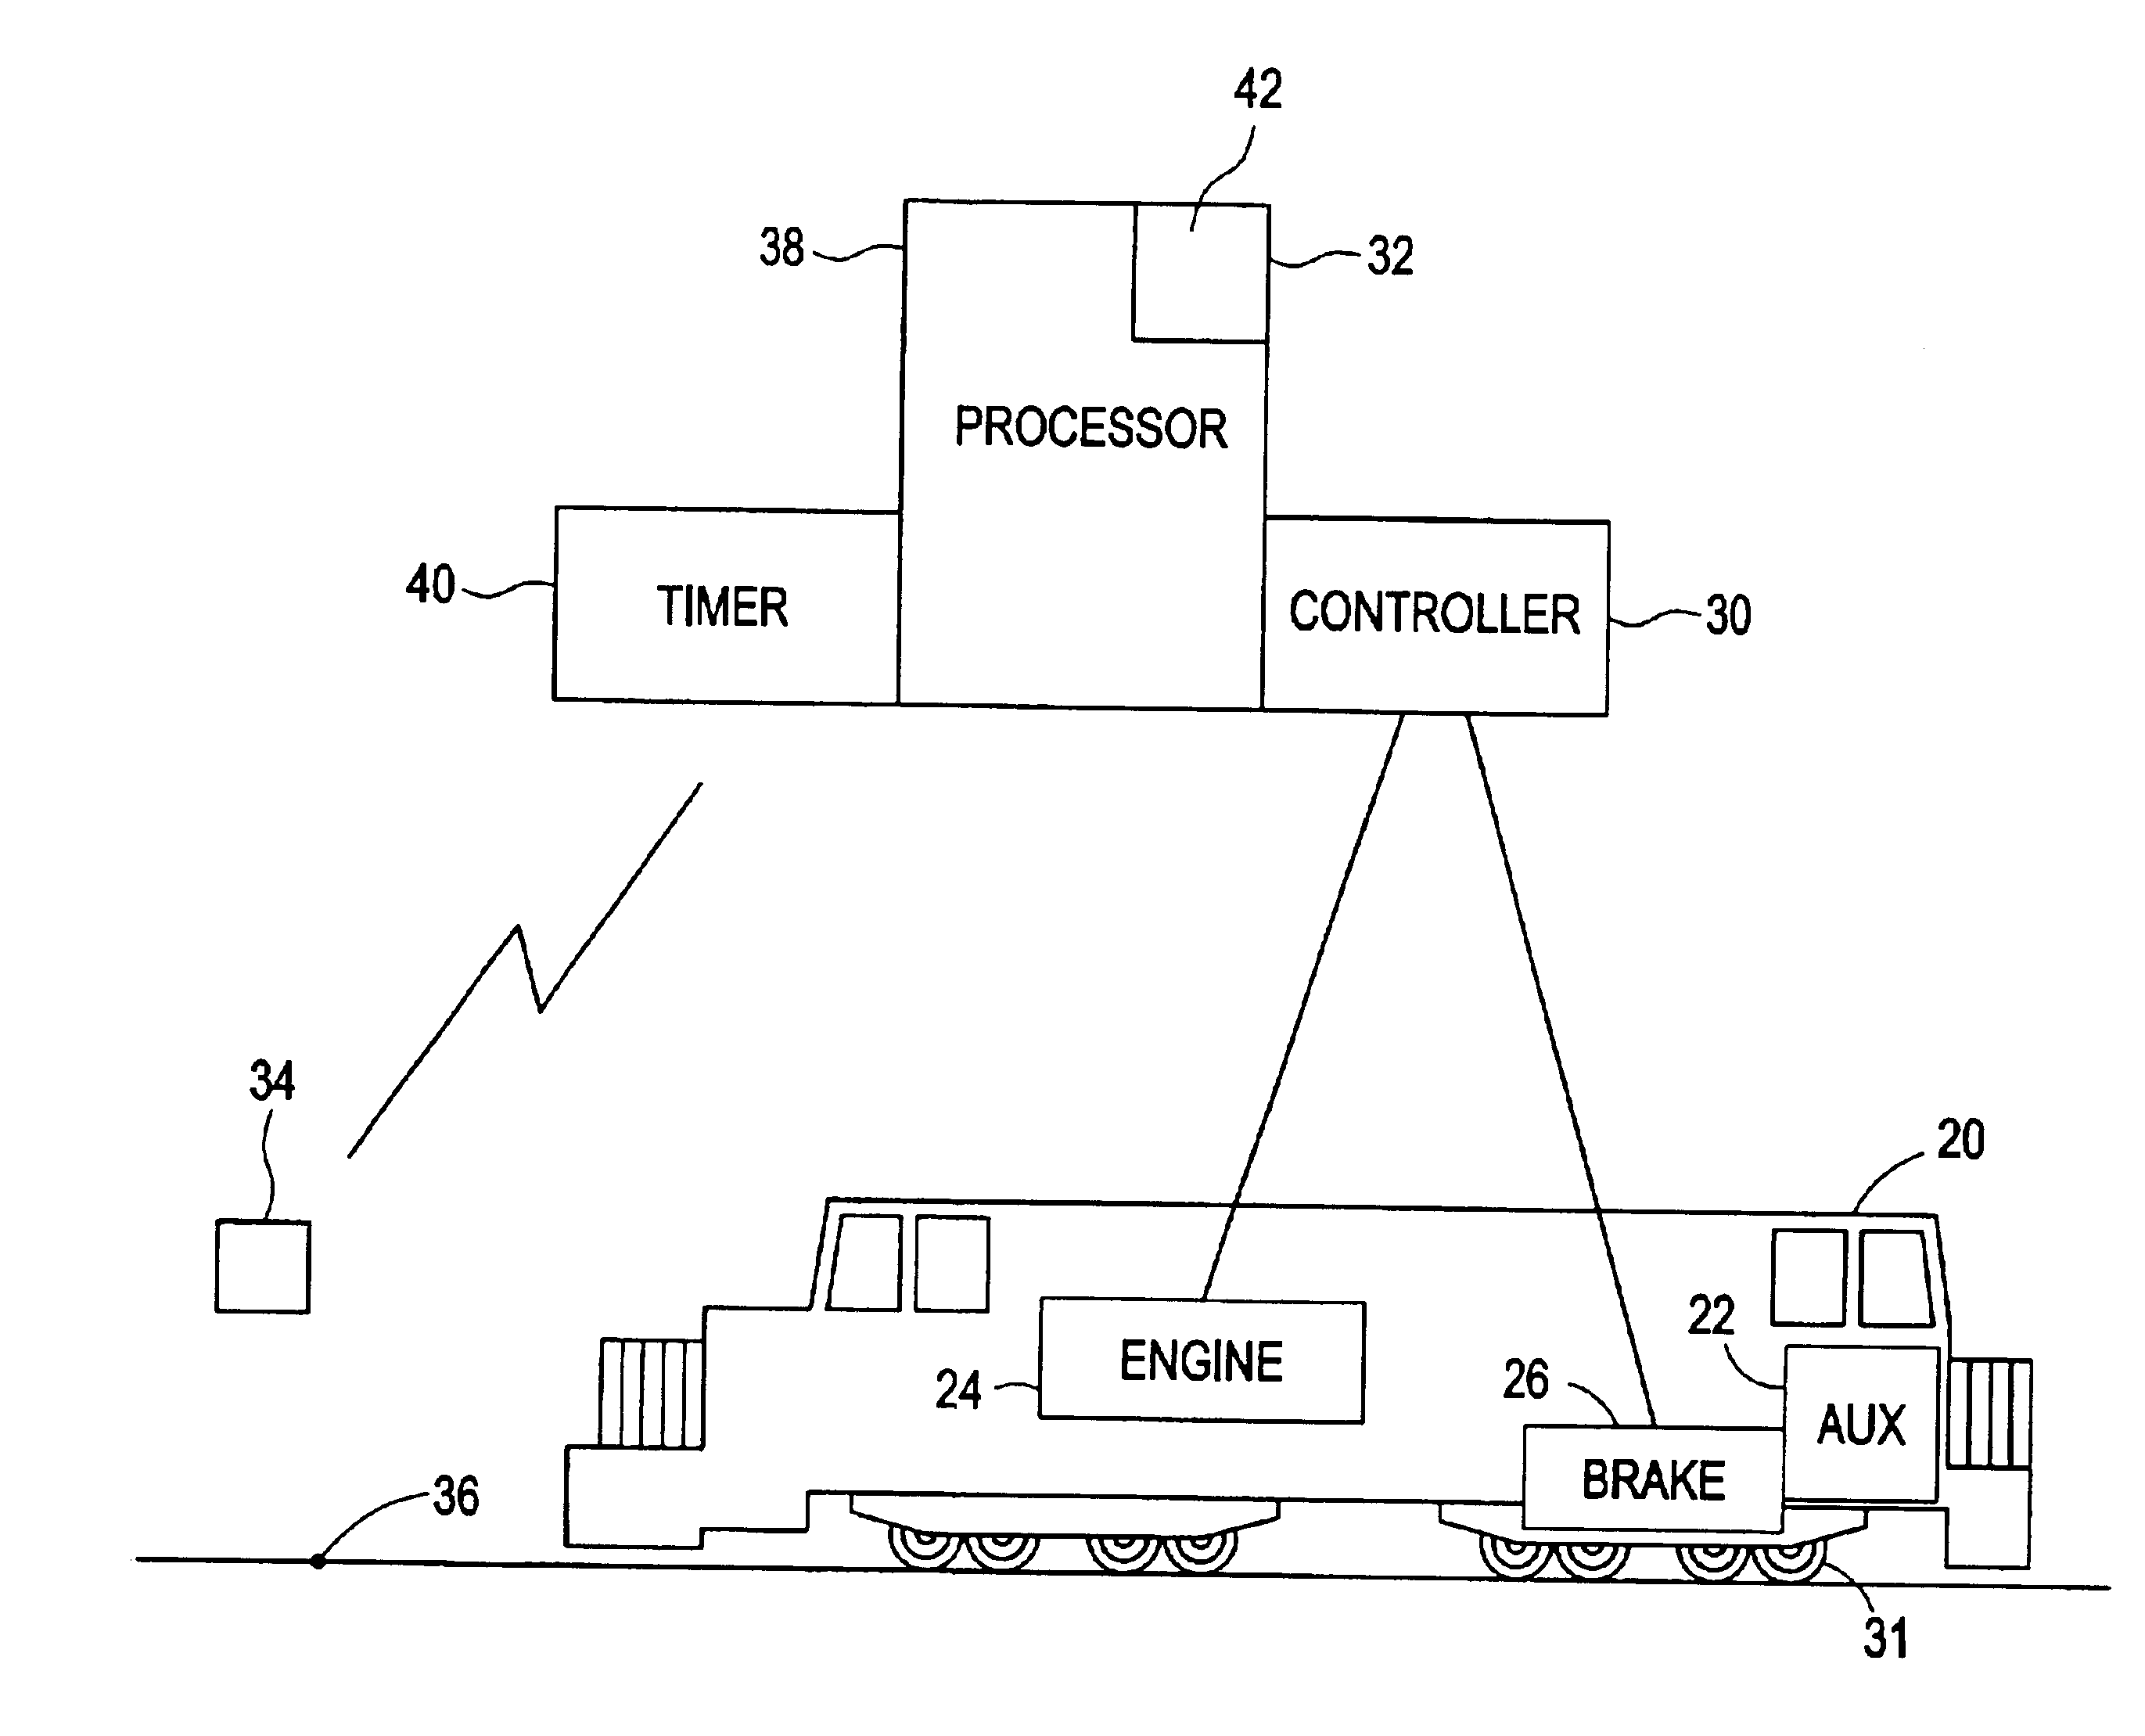 Method and system for improving acceleration rates of locomotives